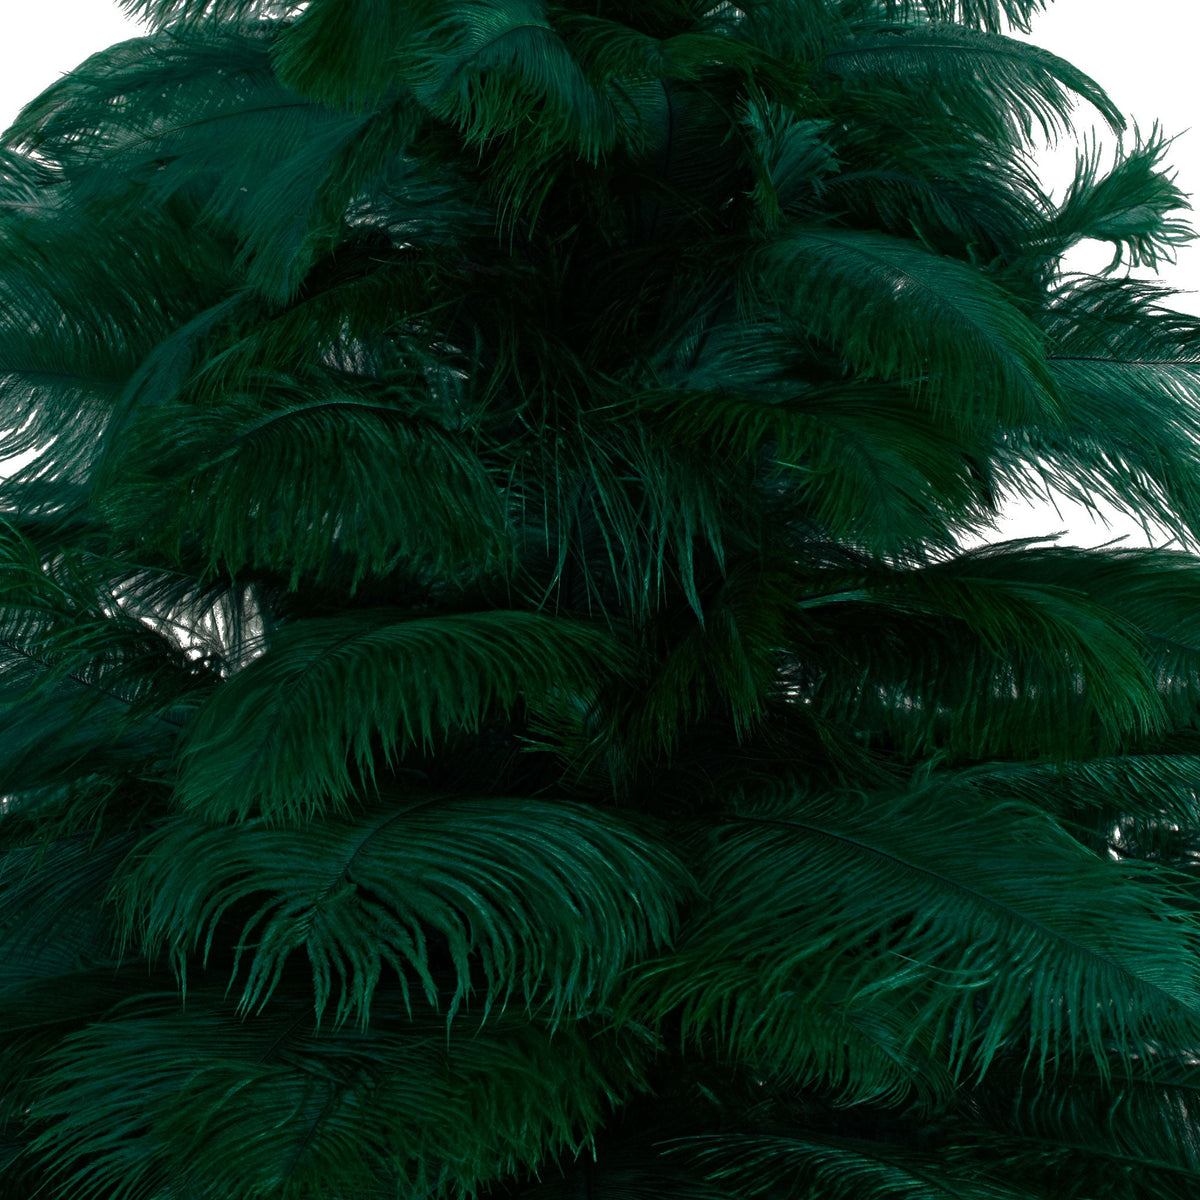 Black Ostrich Feather Tree